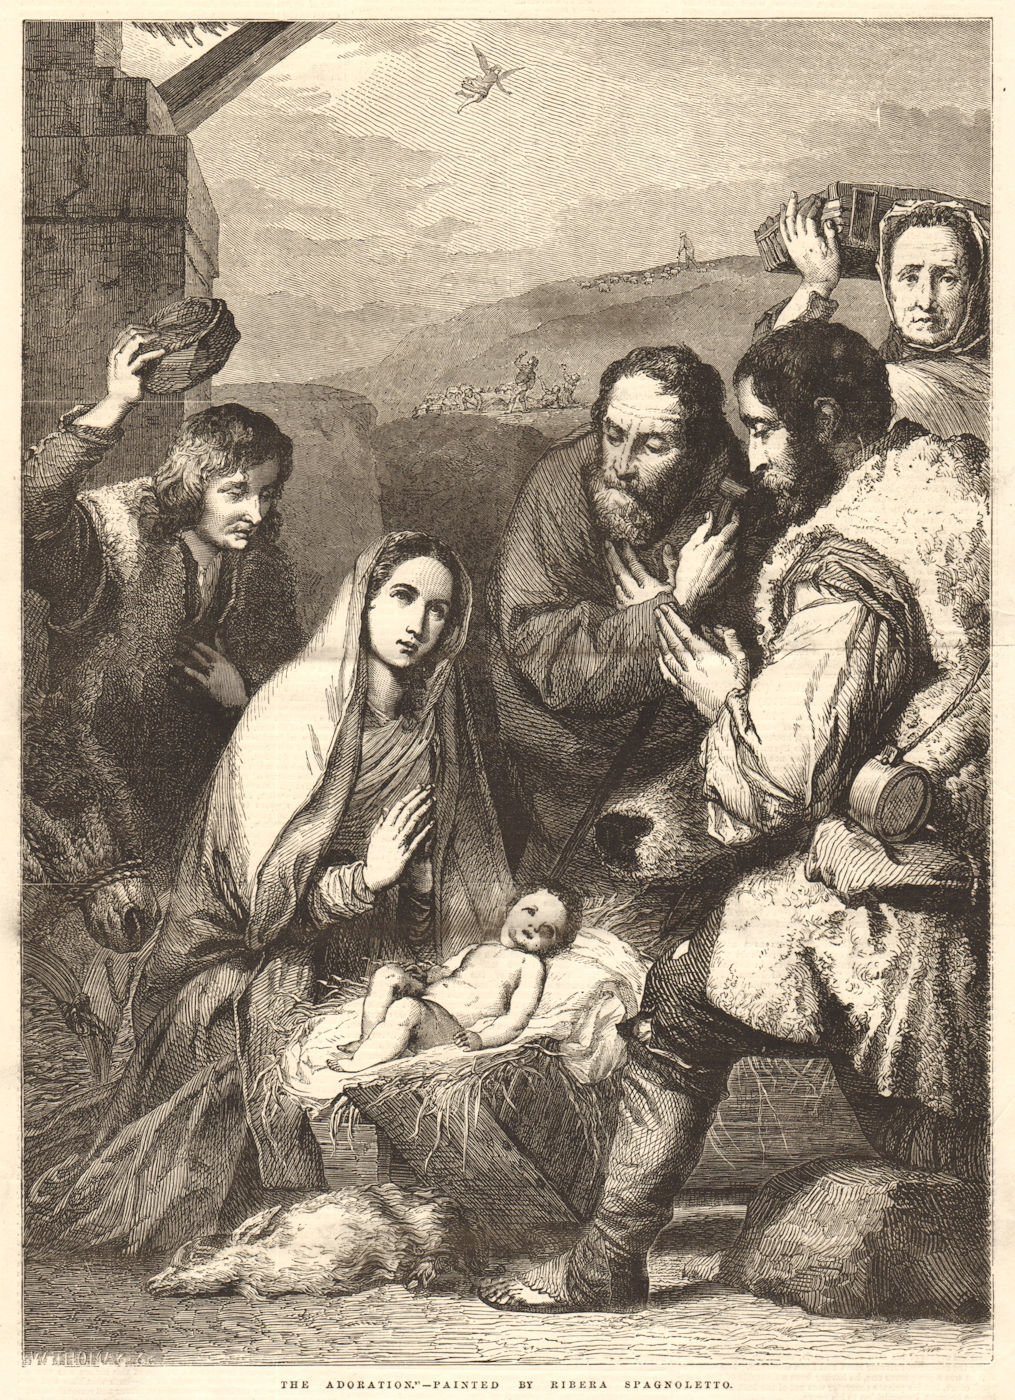 Associate Product The Adoration - painted by Ribera Spagnoletto. Religious. Fine Arts 1856 print